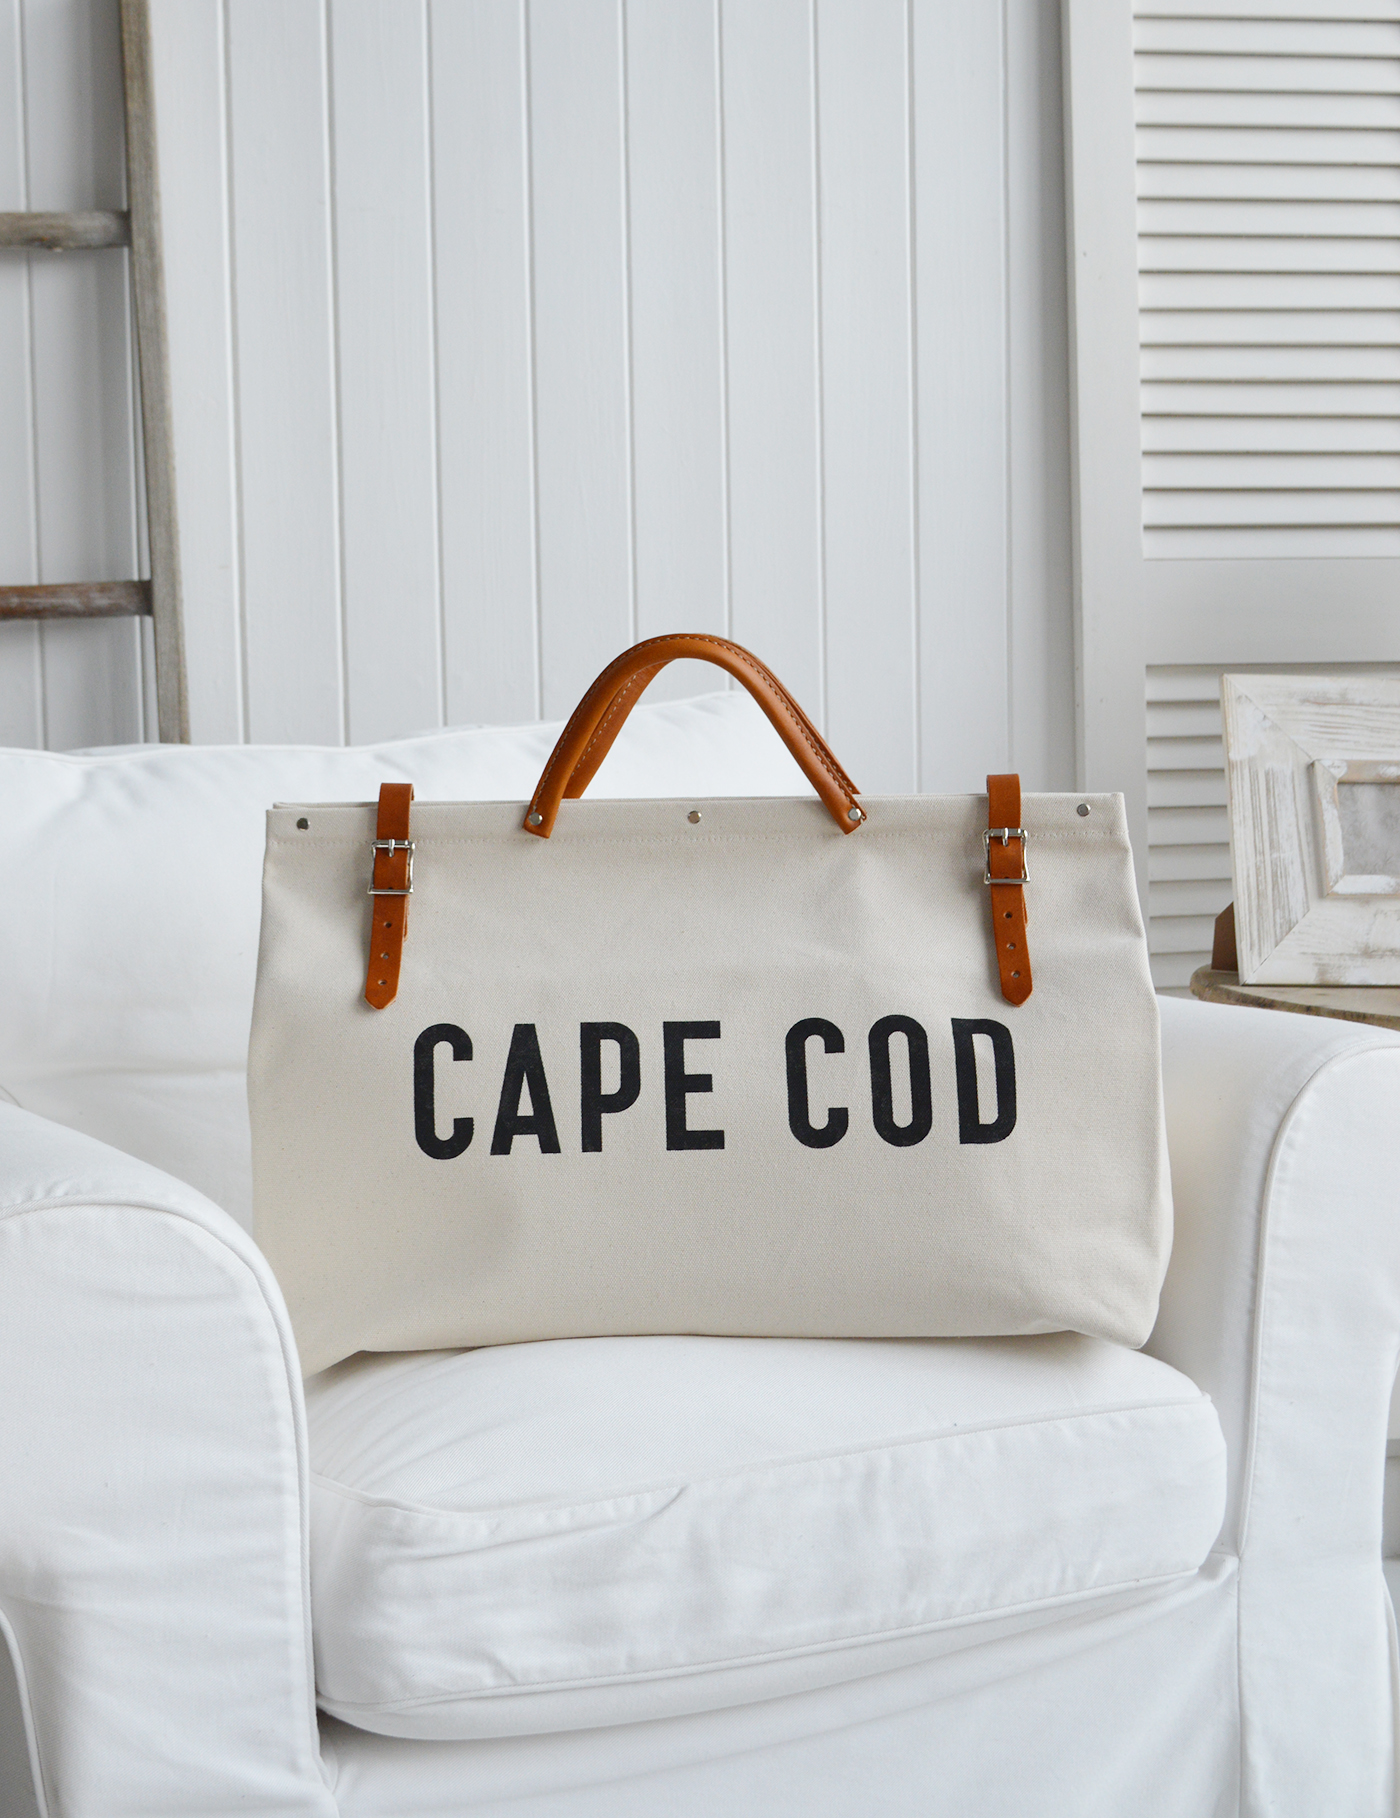 New England Lifestyle. Bags, scarves, jewellery and more